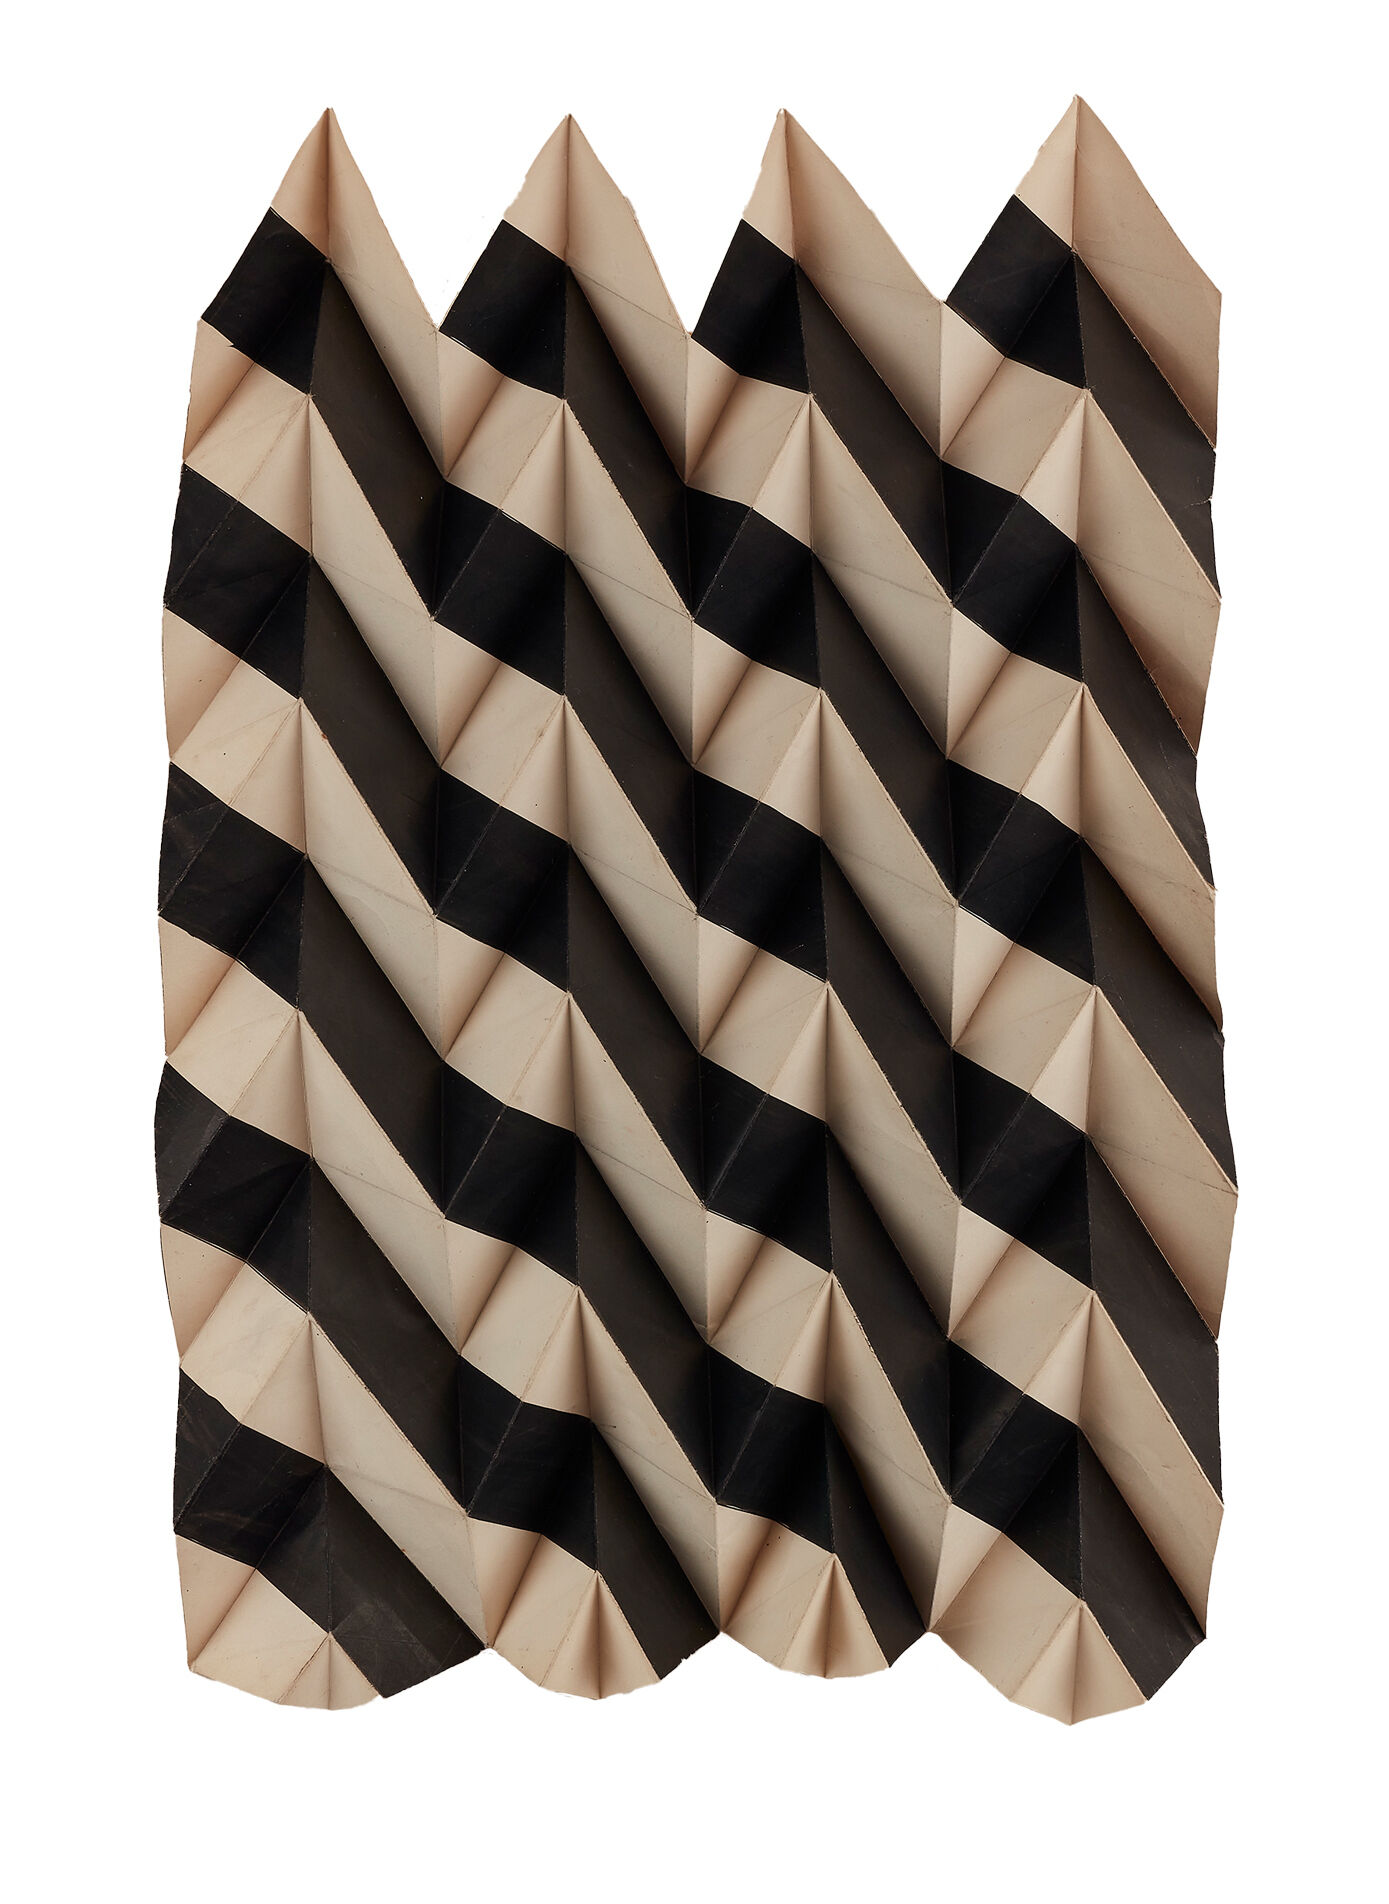 A three-dimensional rectangular hanging paperfold sculpture, with diagonal black and white stripes.